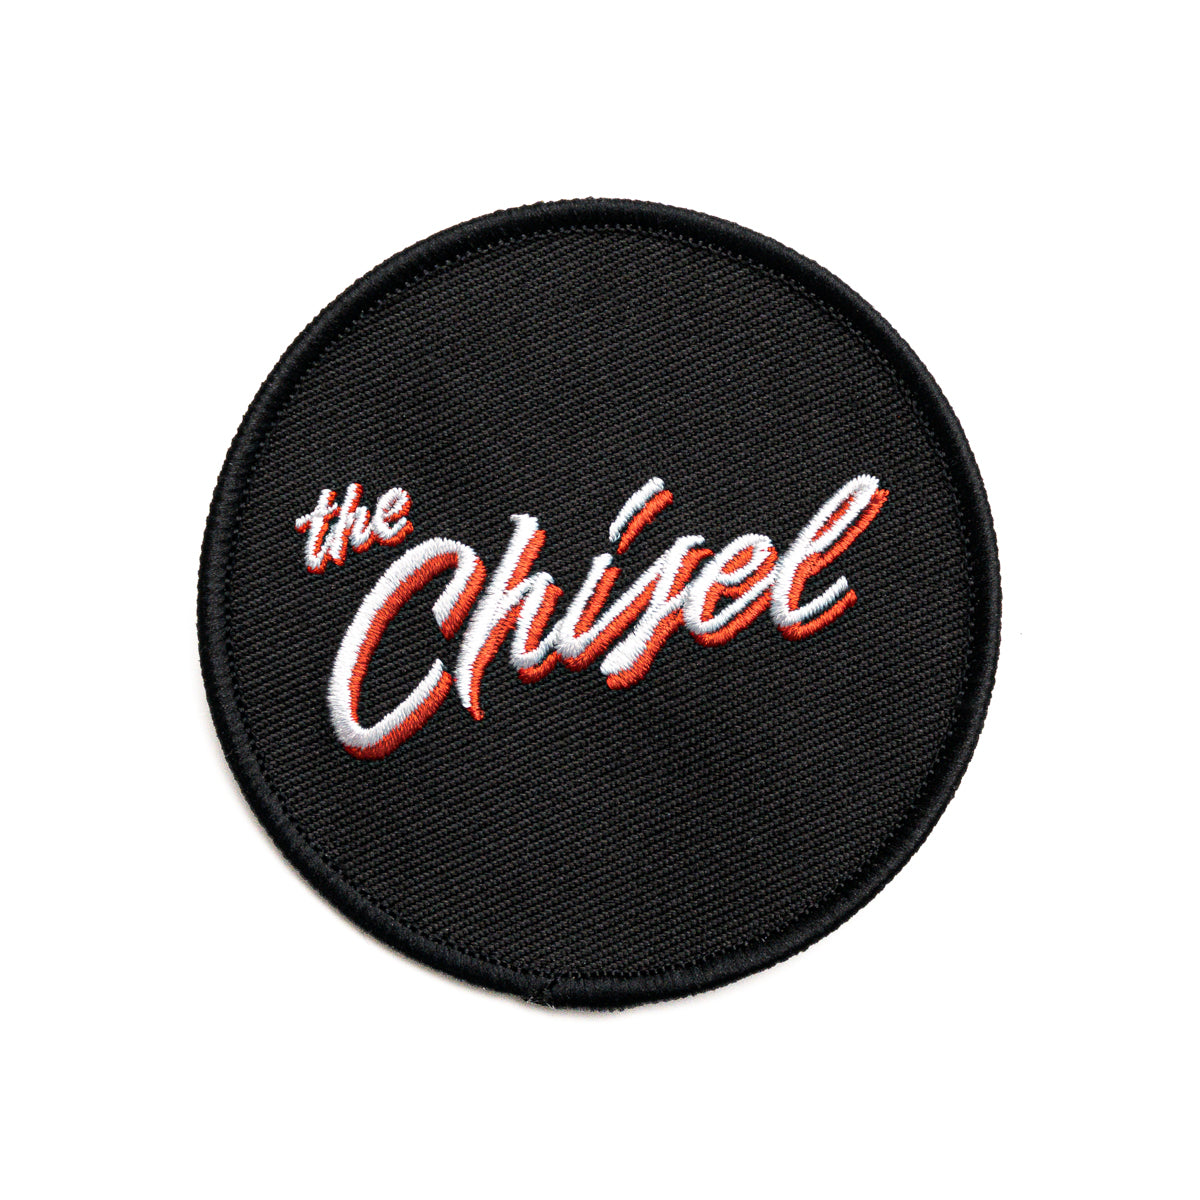 THE CHISEL "Logo" Embroidered Patch